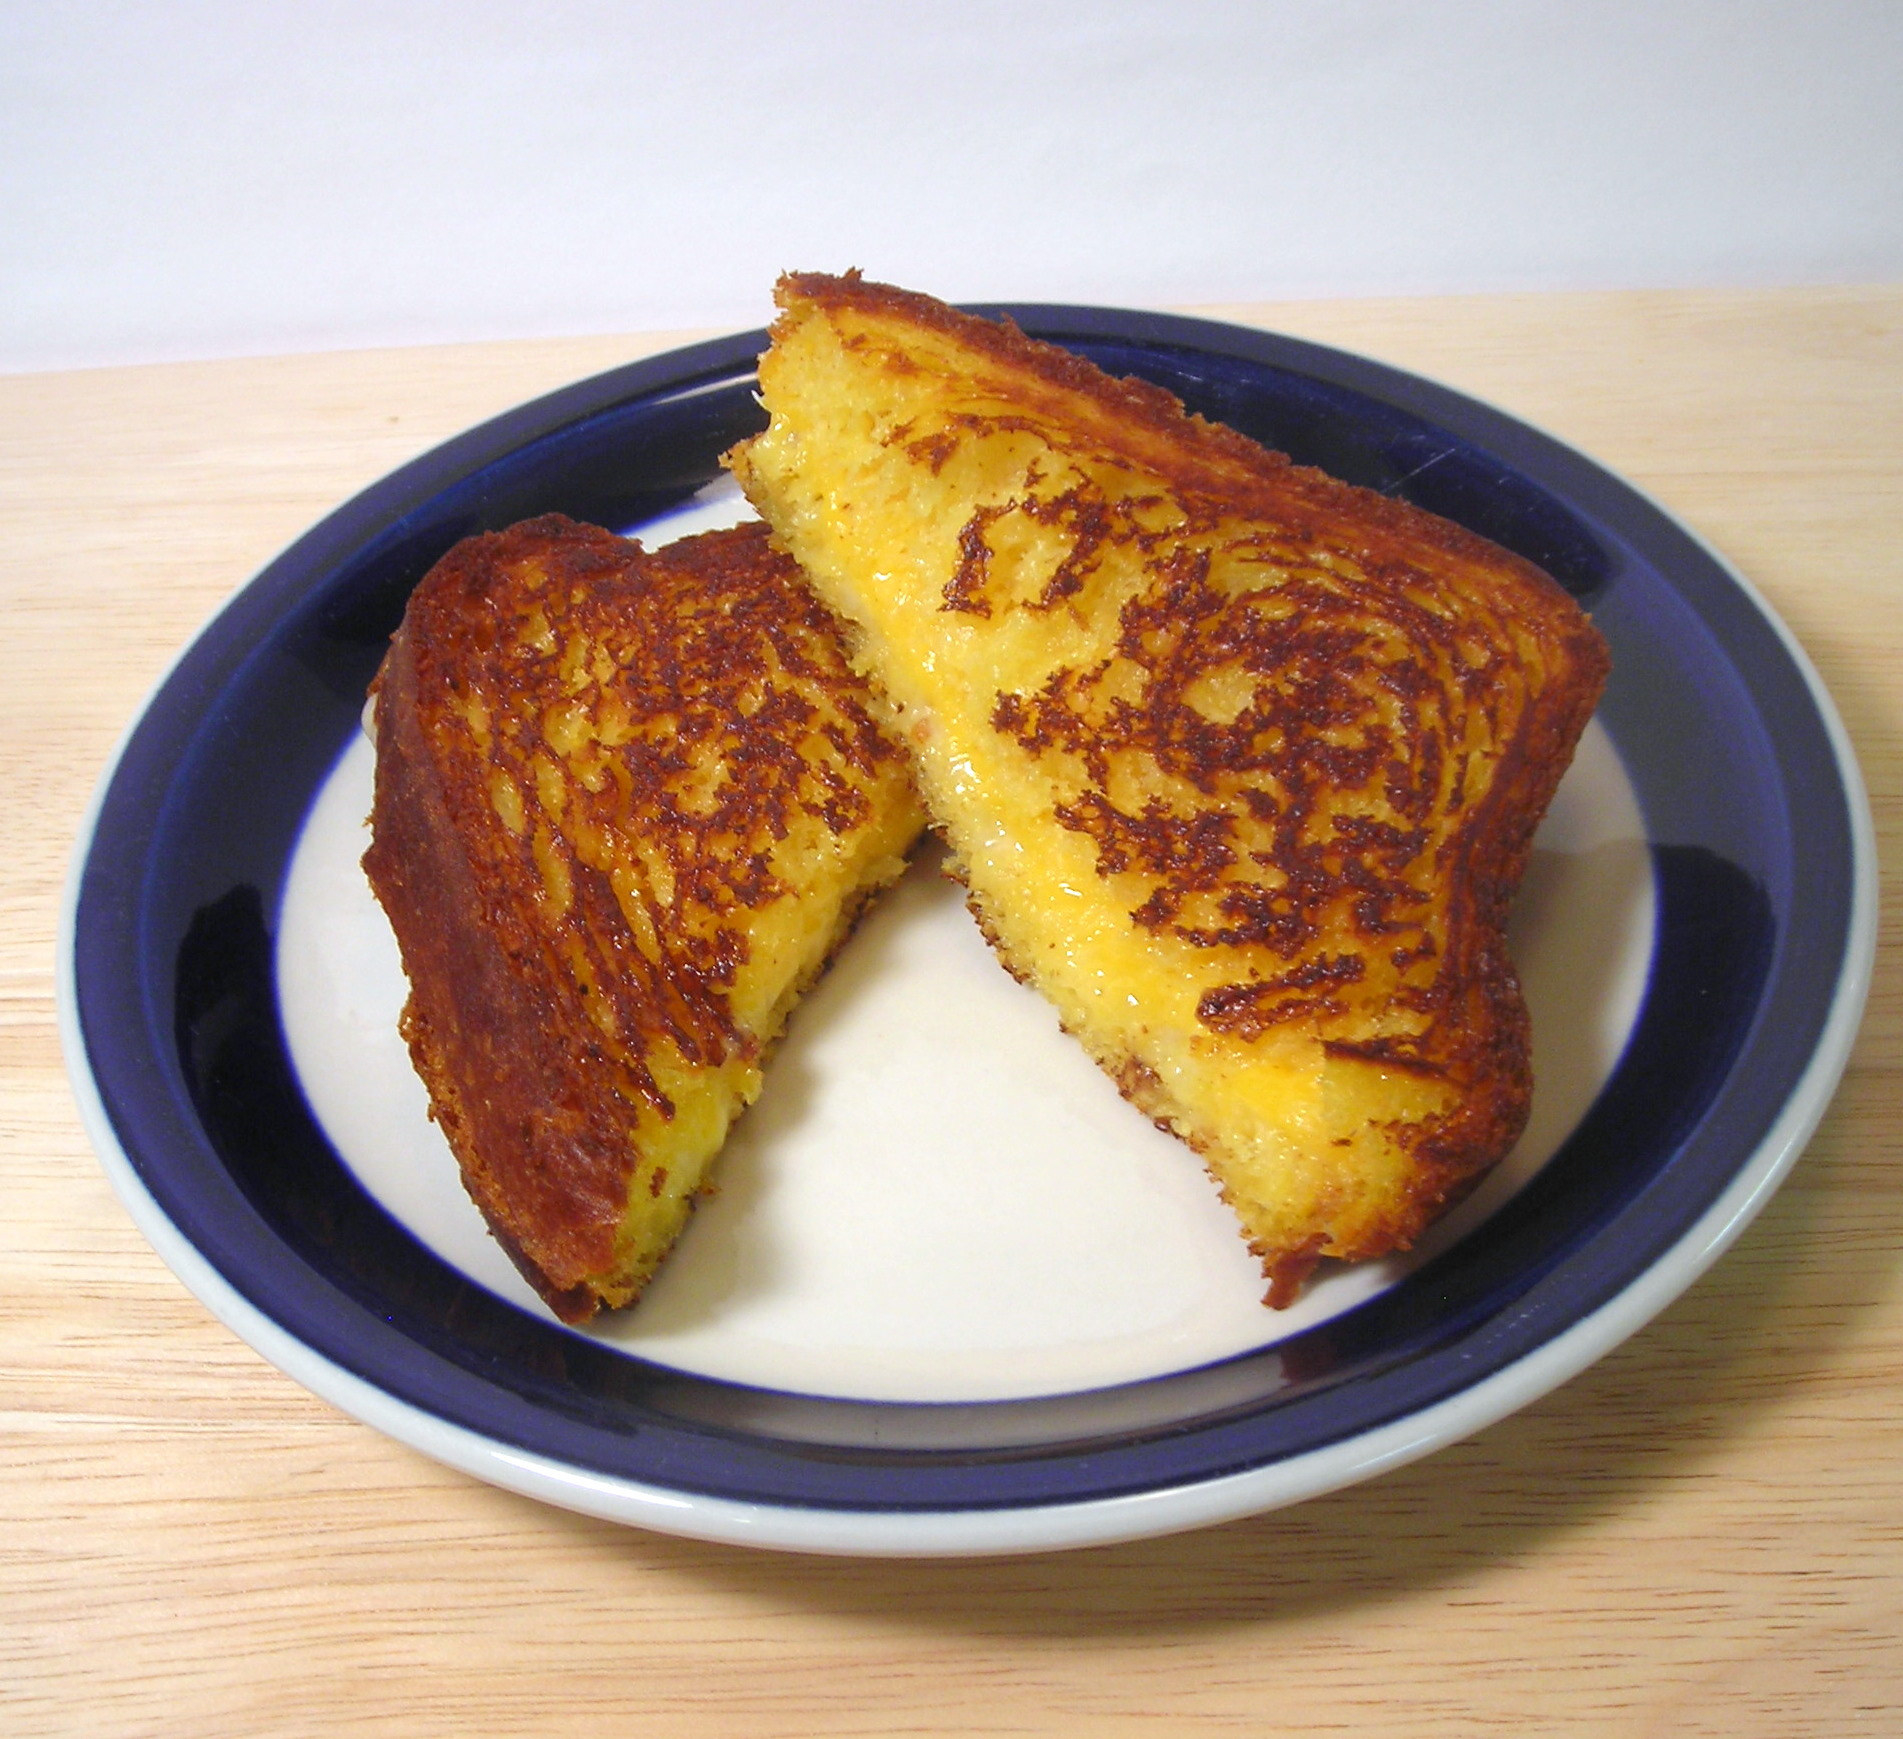 A grilled cheese sandwich sliced diagonally